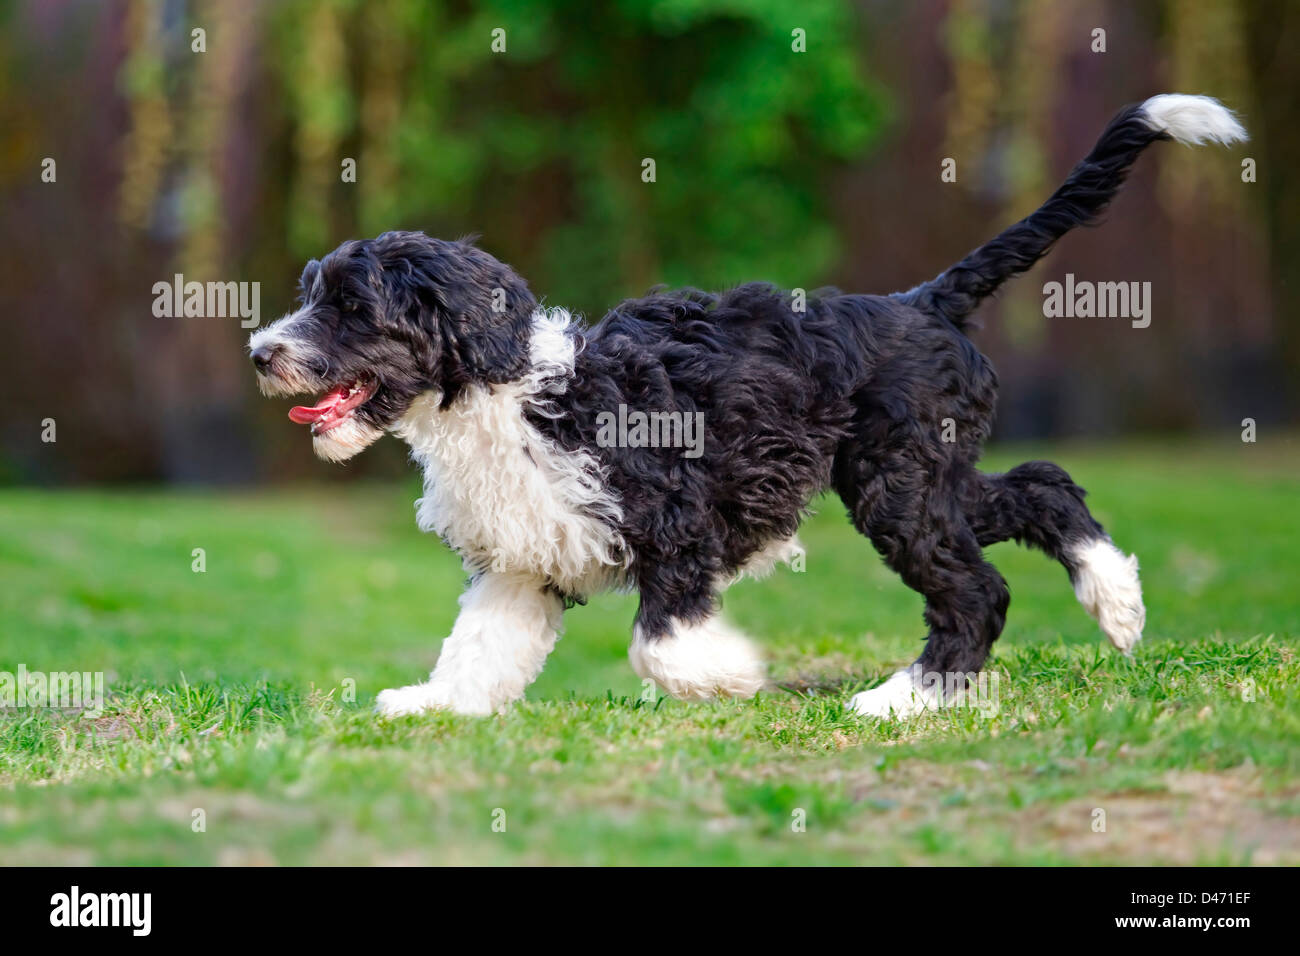 Portuguese Water Dog. Puppy walking on a lawn Stock Photo